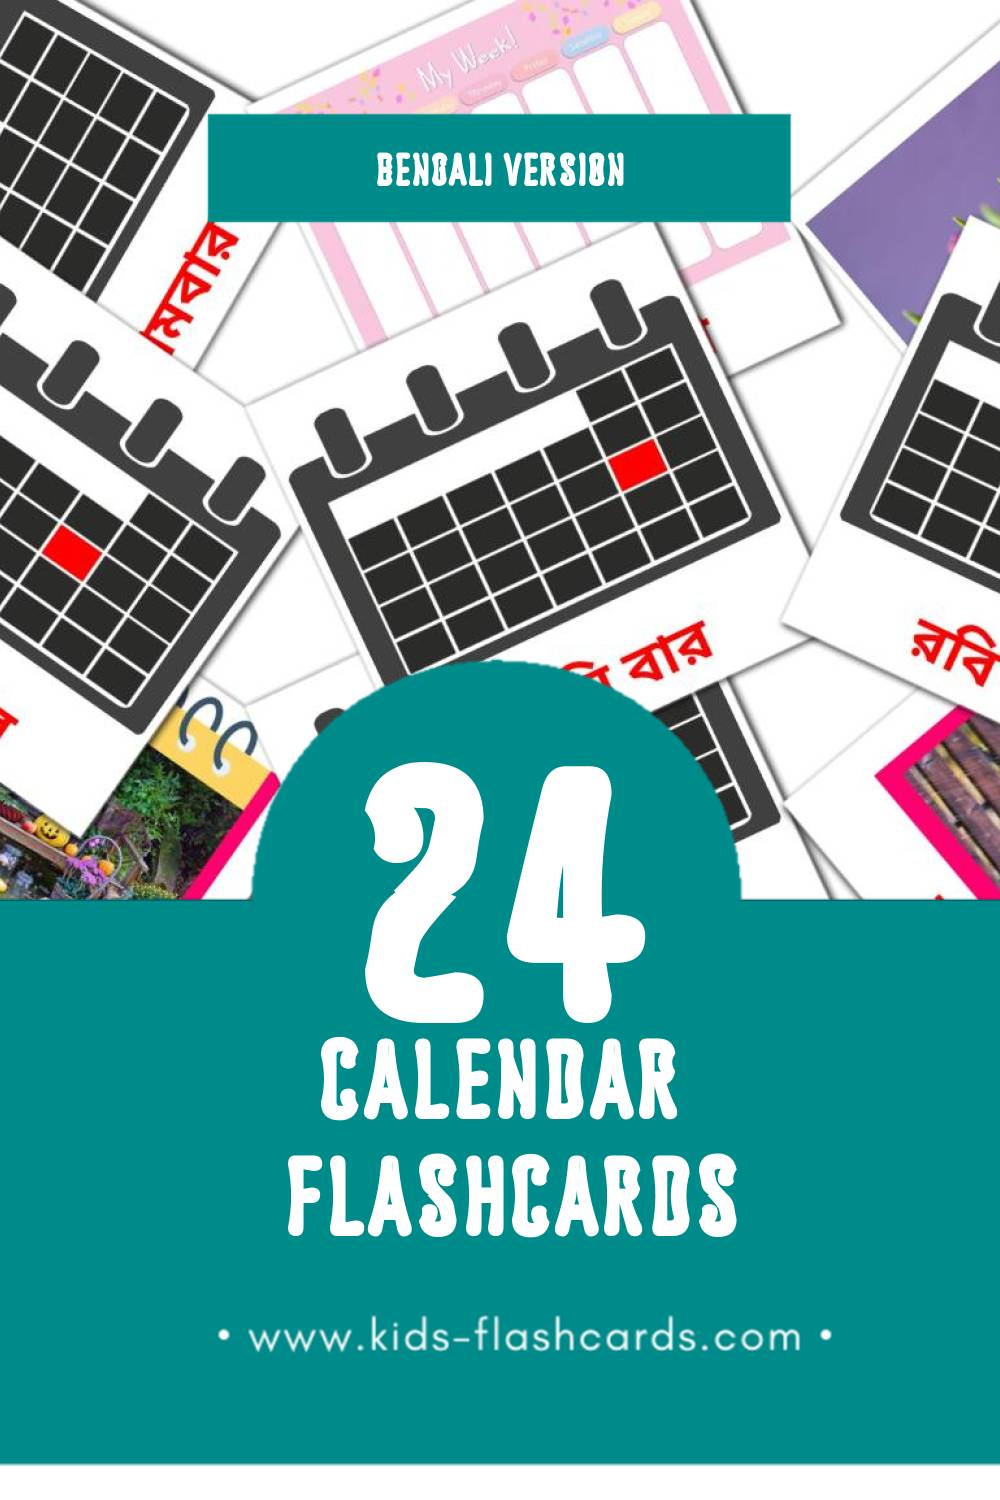 Visual পঞ্জিকা Flashcards for Toddlers (12 cards in Bengali)